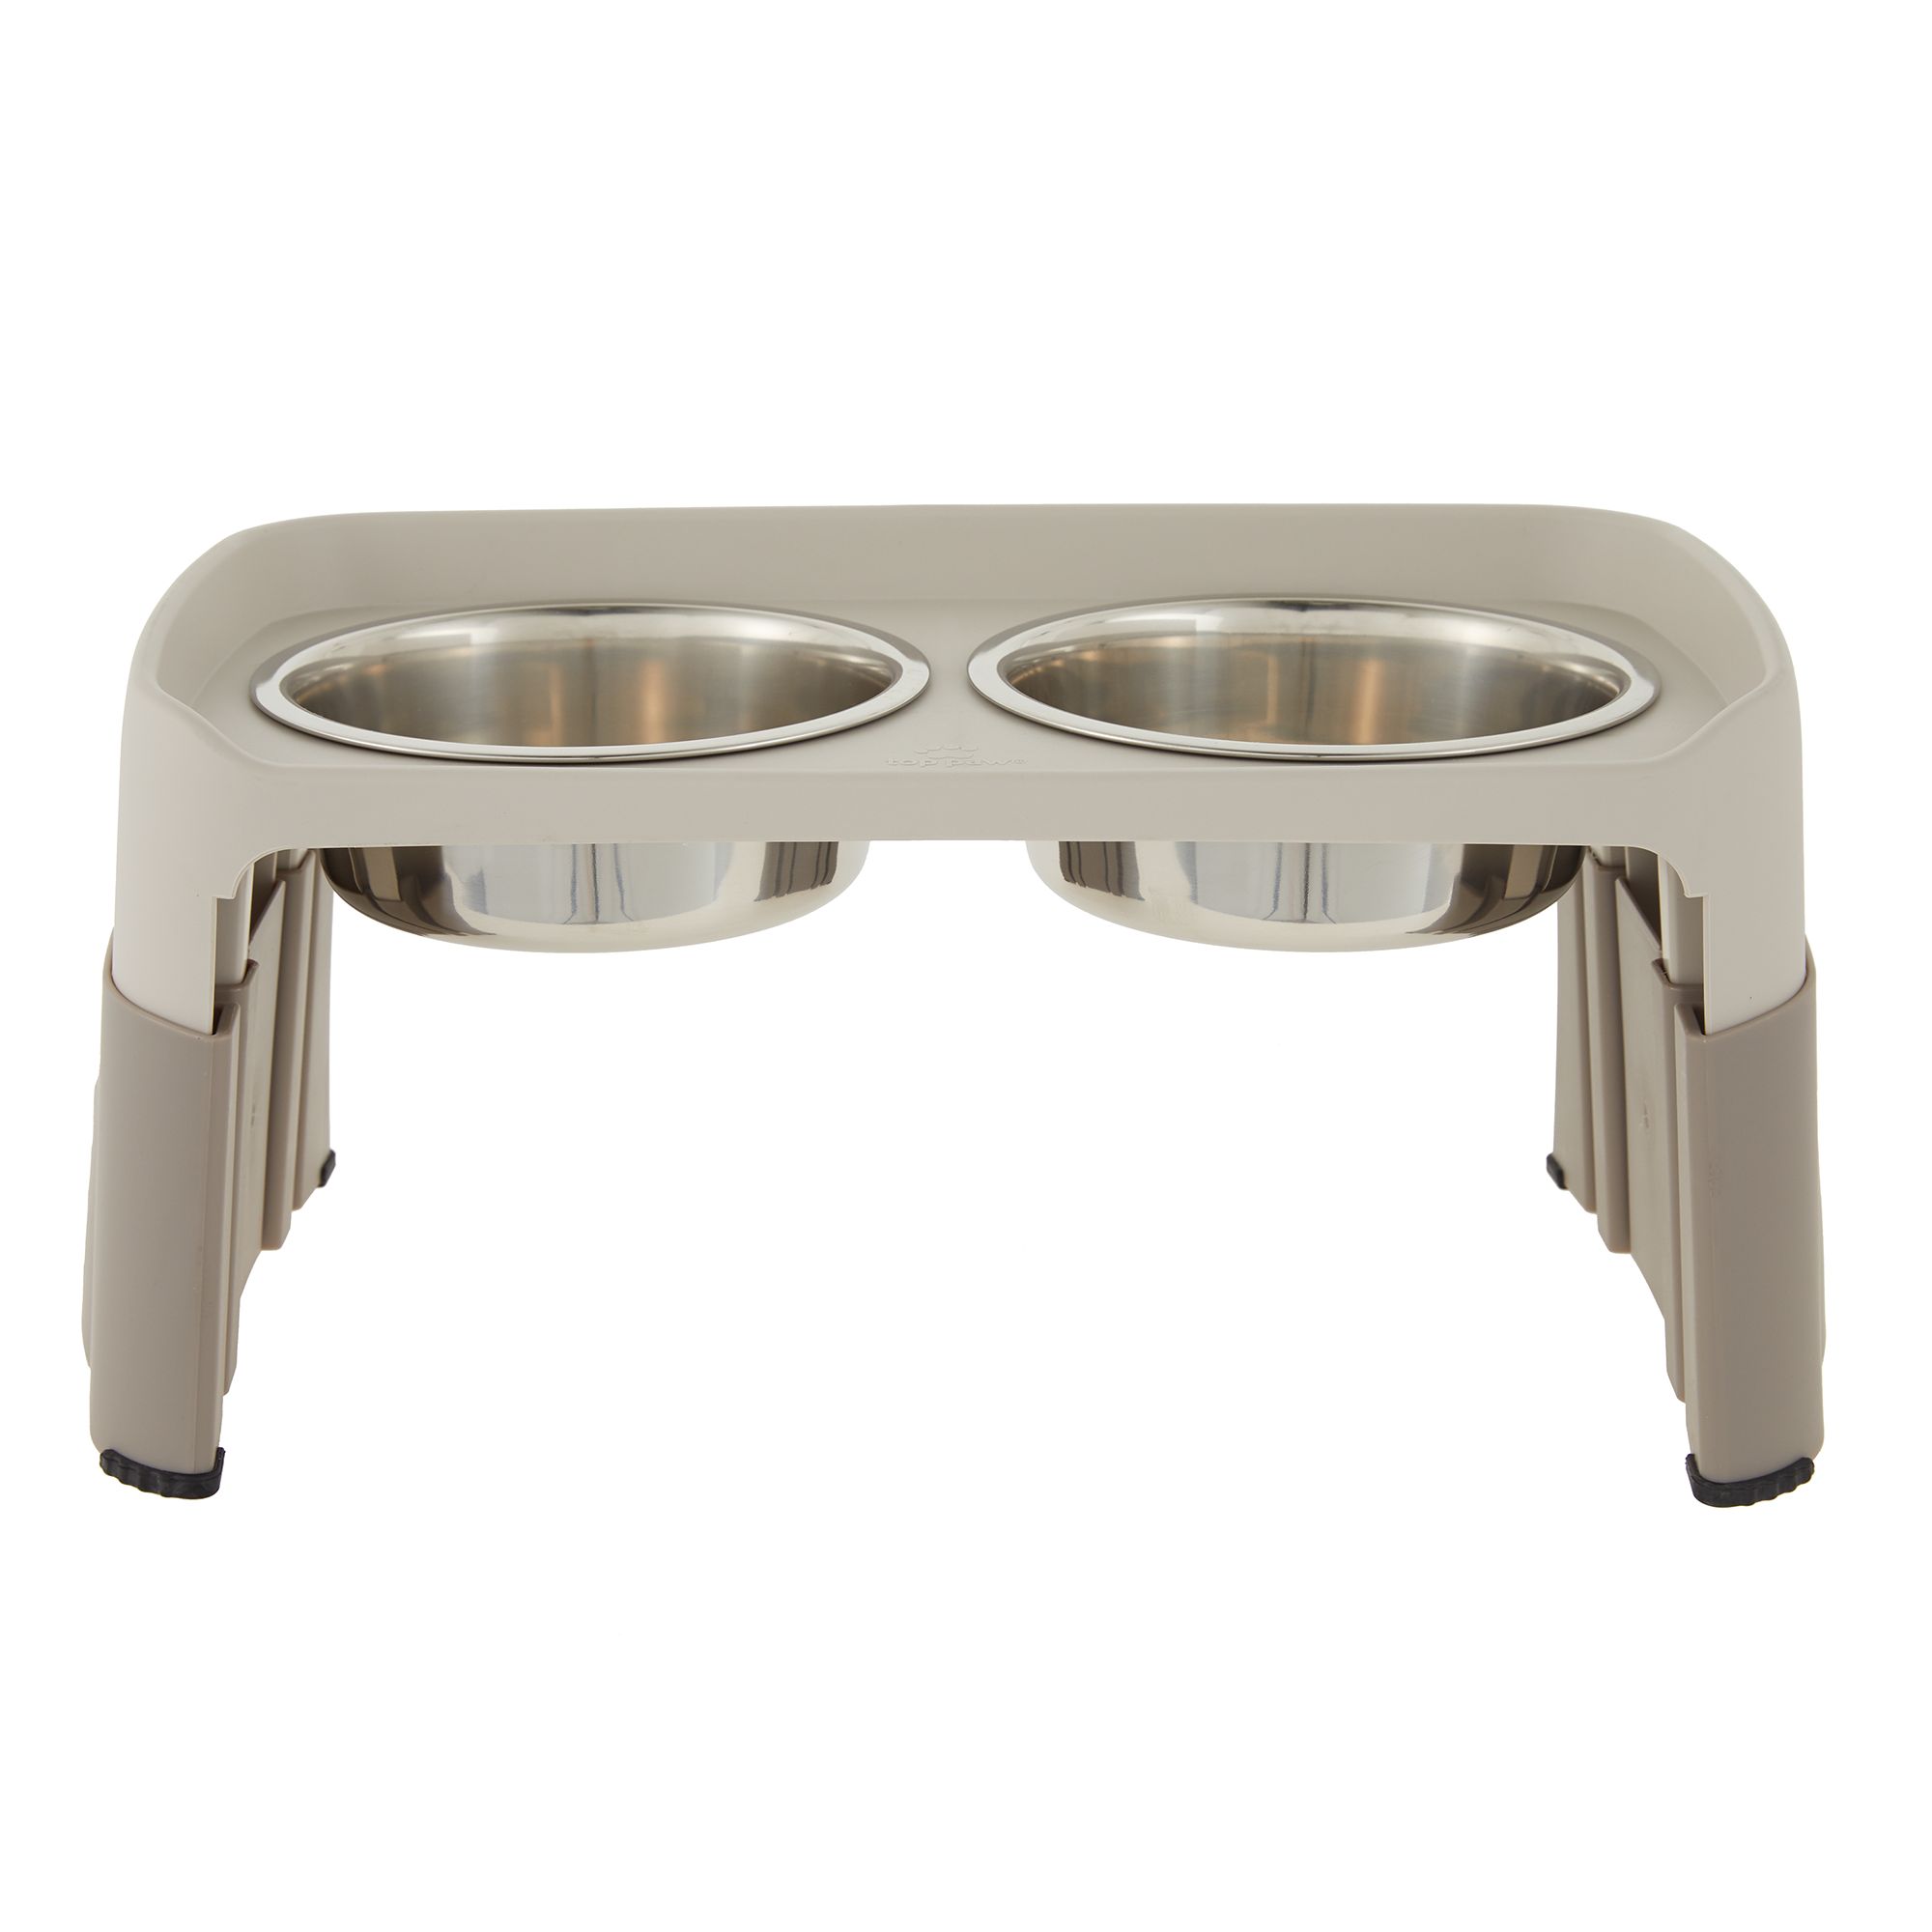 3 Adjustable Heights Raised Pets Feeder Bowls W/Stainless Steel Bowls for Small Medium Large Dogs LIVINGbasics Adjustable Elevated Dog Bowls